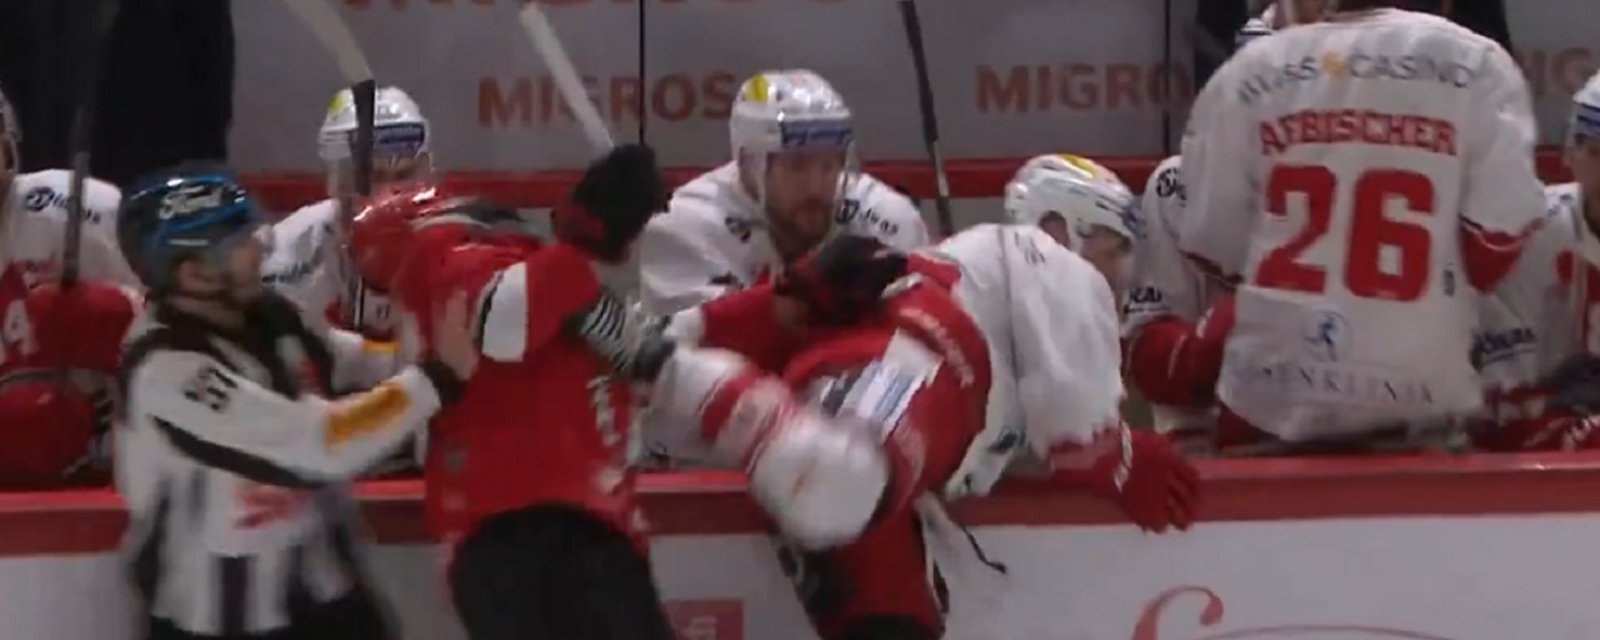 Former NHL player kicks opponent in face with skate.